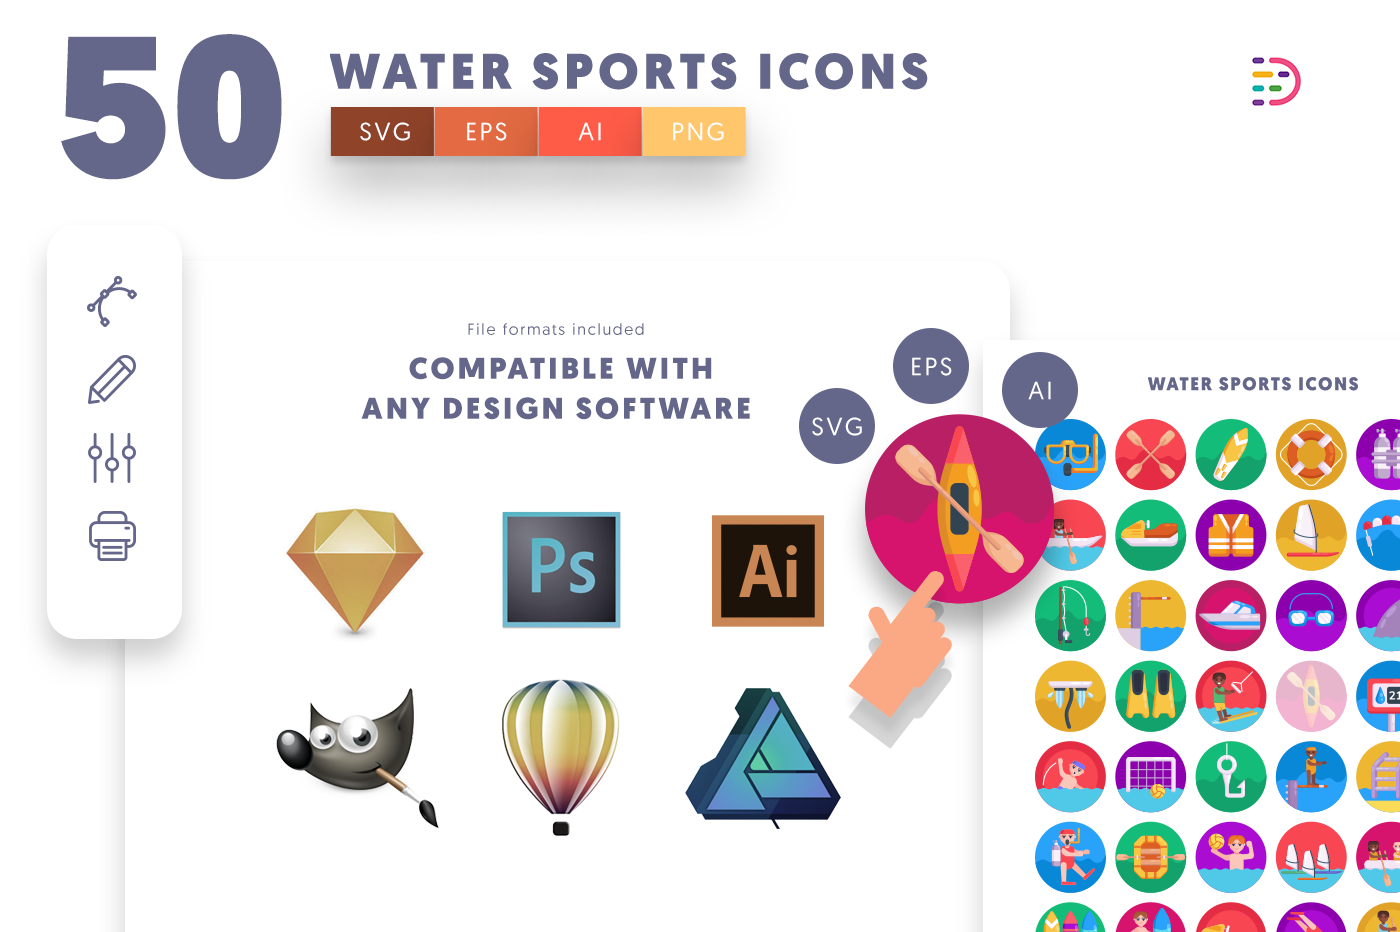  full vector Water Sports Icons 